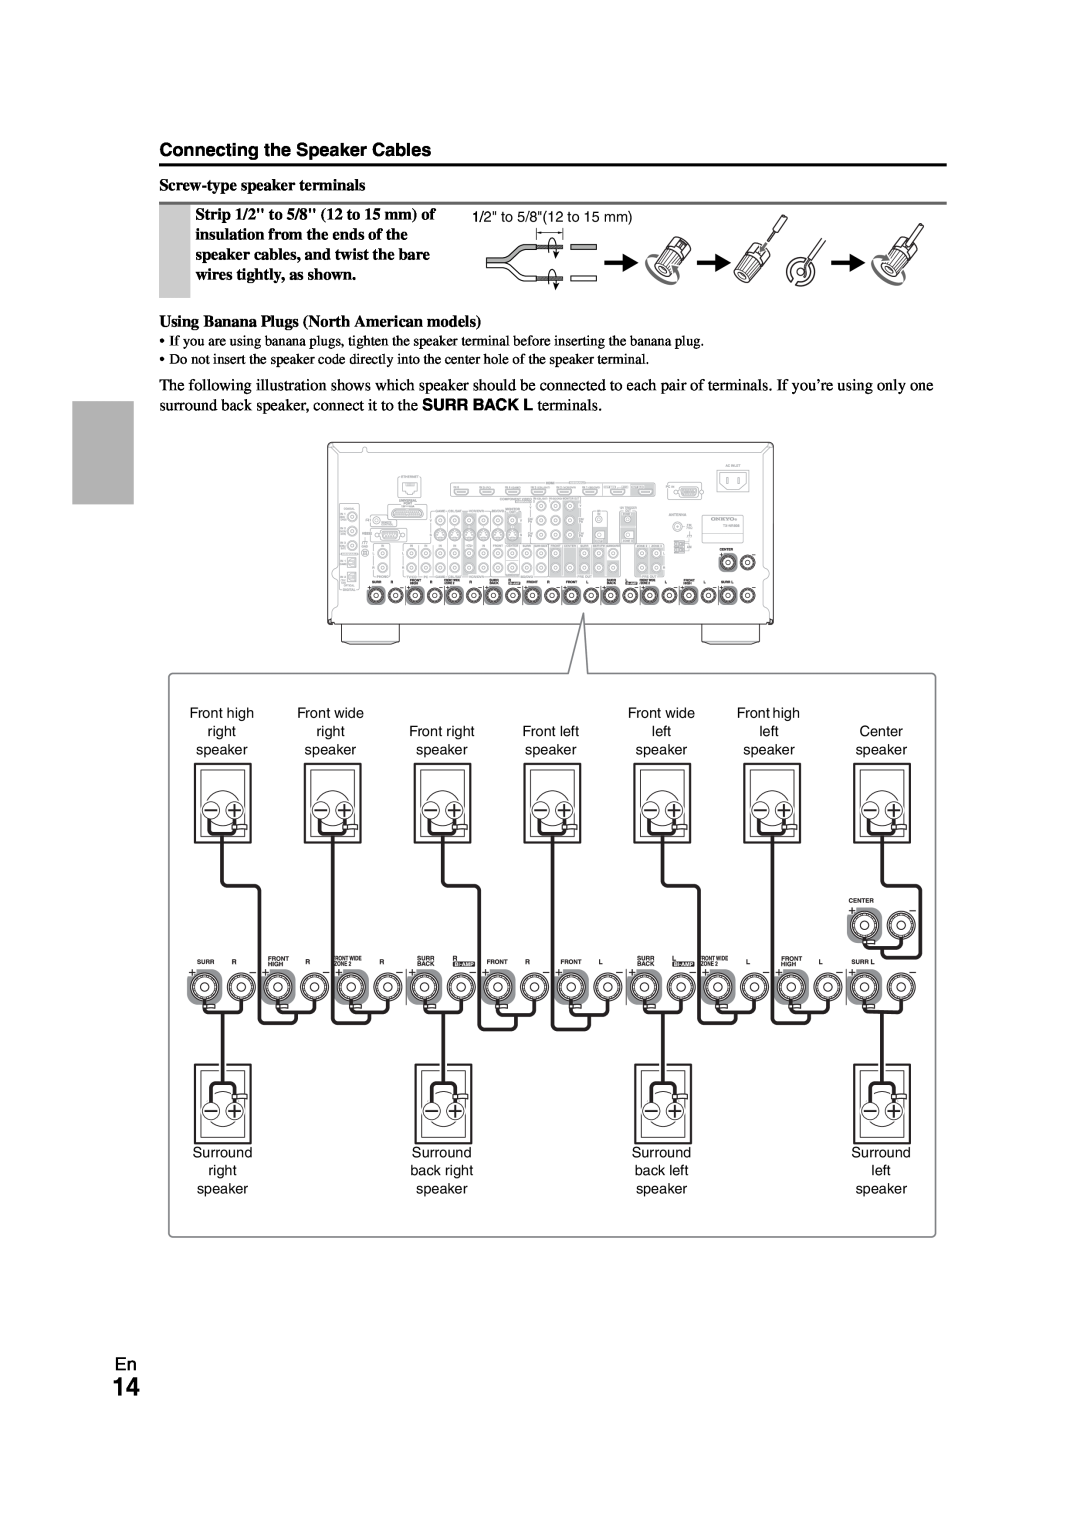 Onkyo TX-NR808 Connecting the Speaker Cables, Screw-typespeaker terminals, Strip 1/2 to 5/8 12 to 15 mm of 